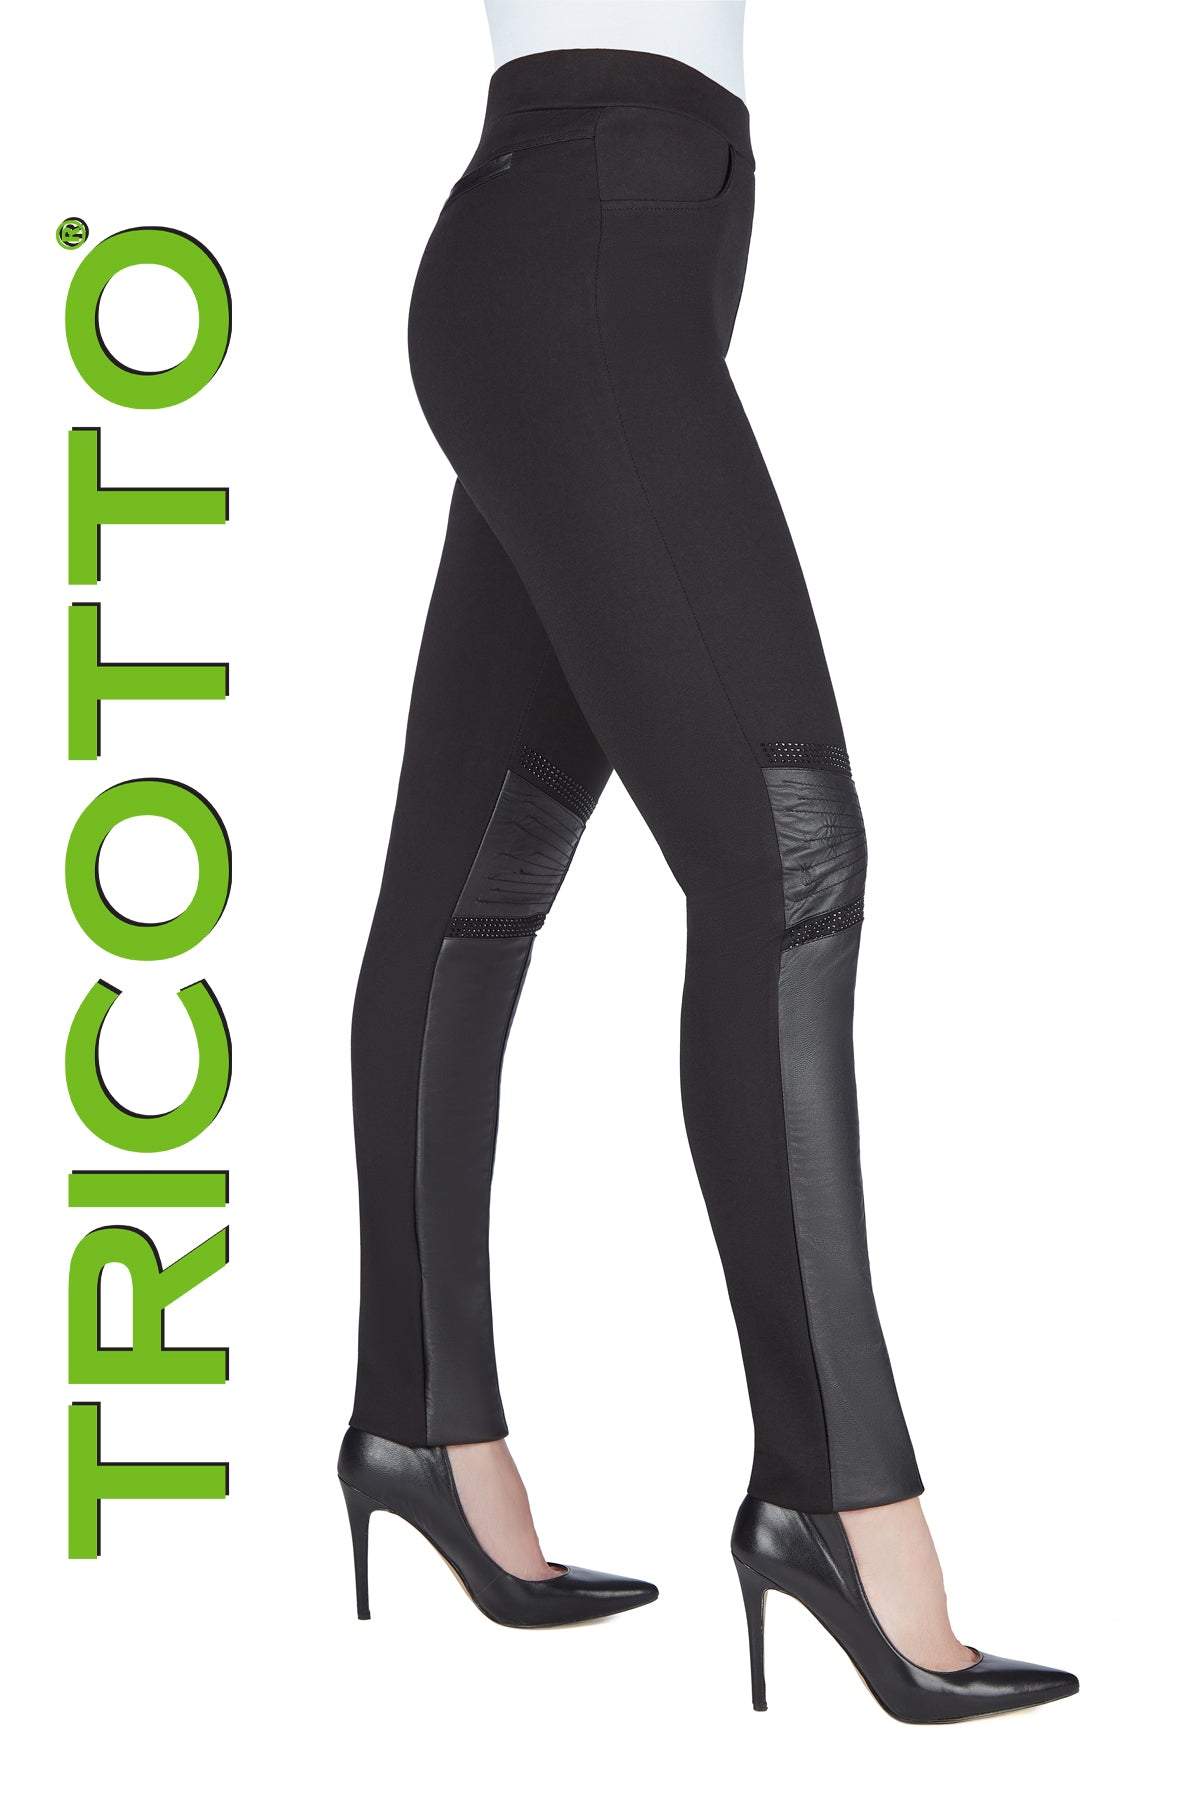 Tricotto Pant-Tricotto Black Pants-Buy Tricotto Clothing Online-Tricotto Fall 2022-Tricotto Fashion Quebec-Tricotto Fashion Quebec-Tricotto Online Shop